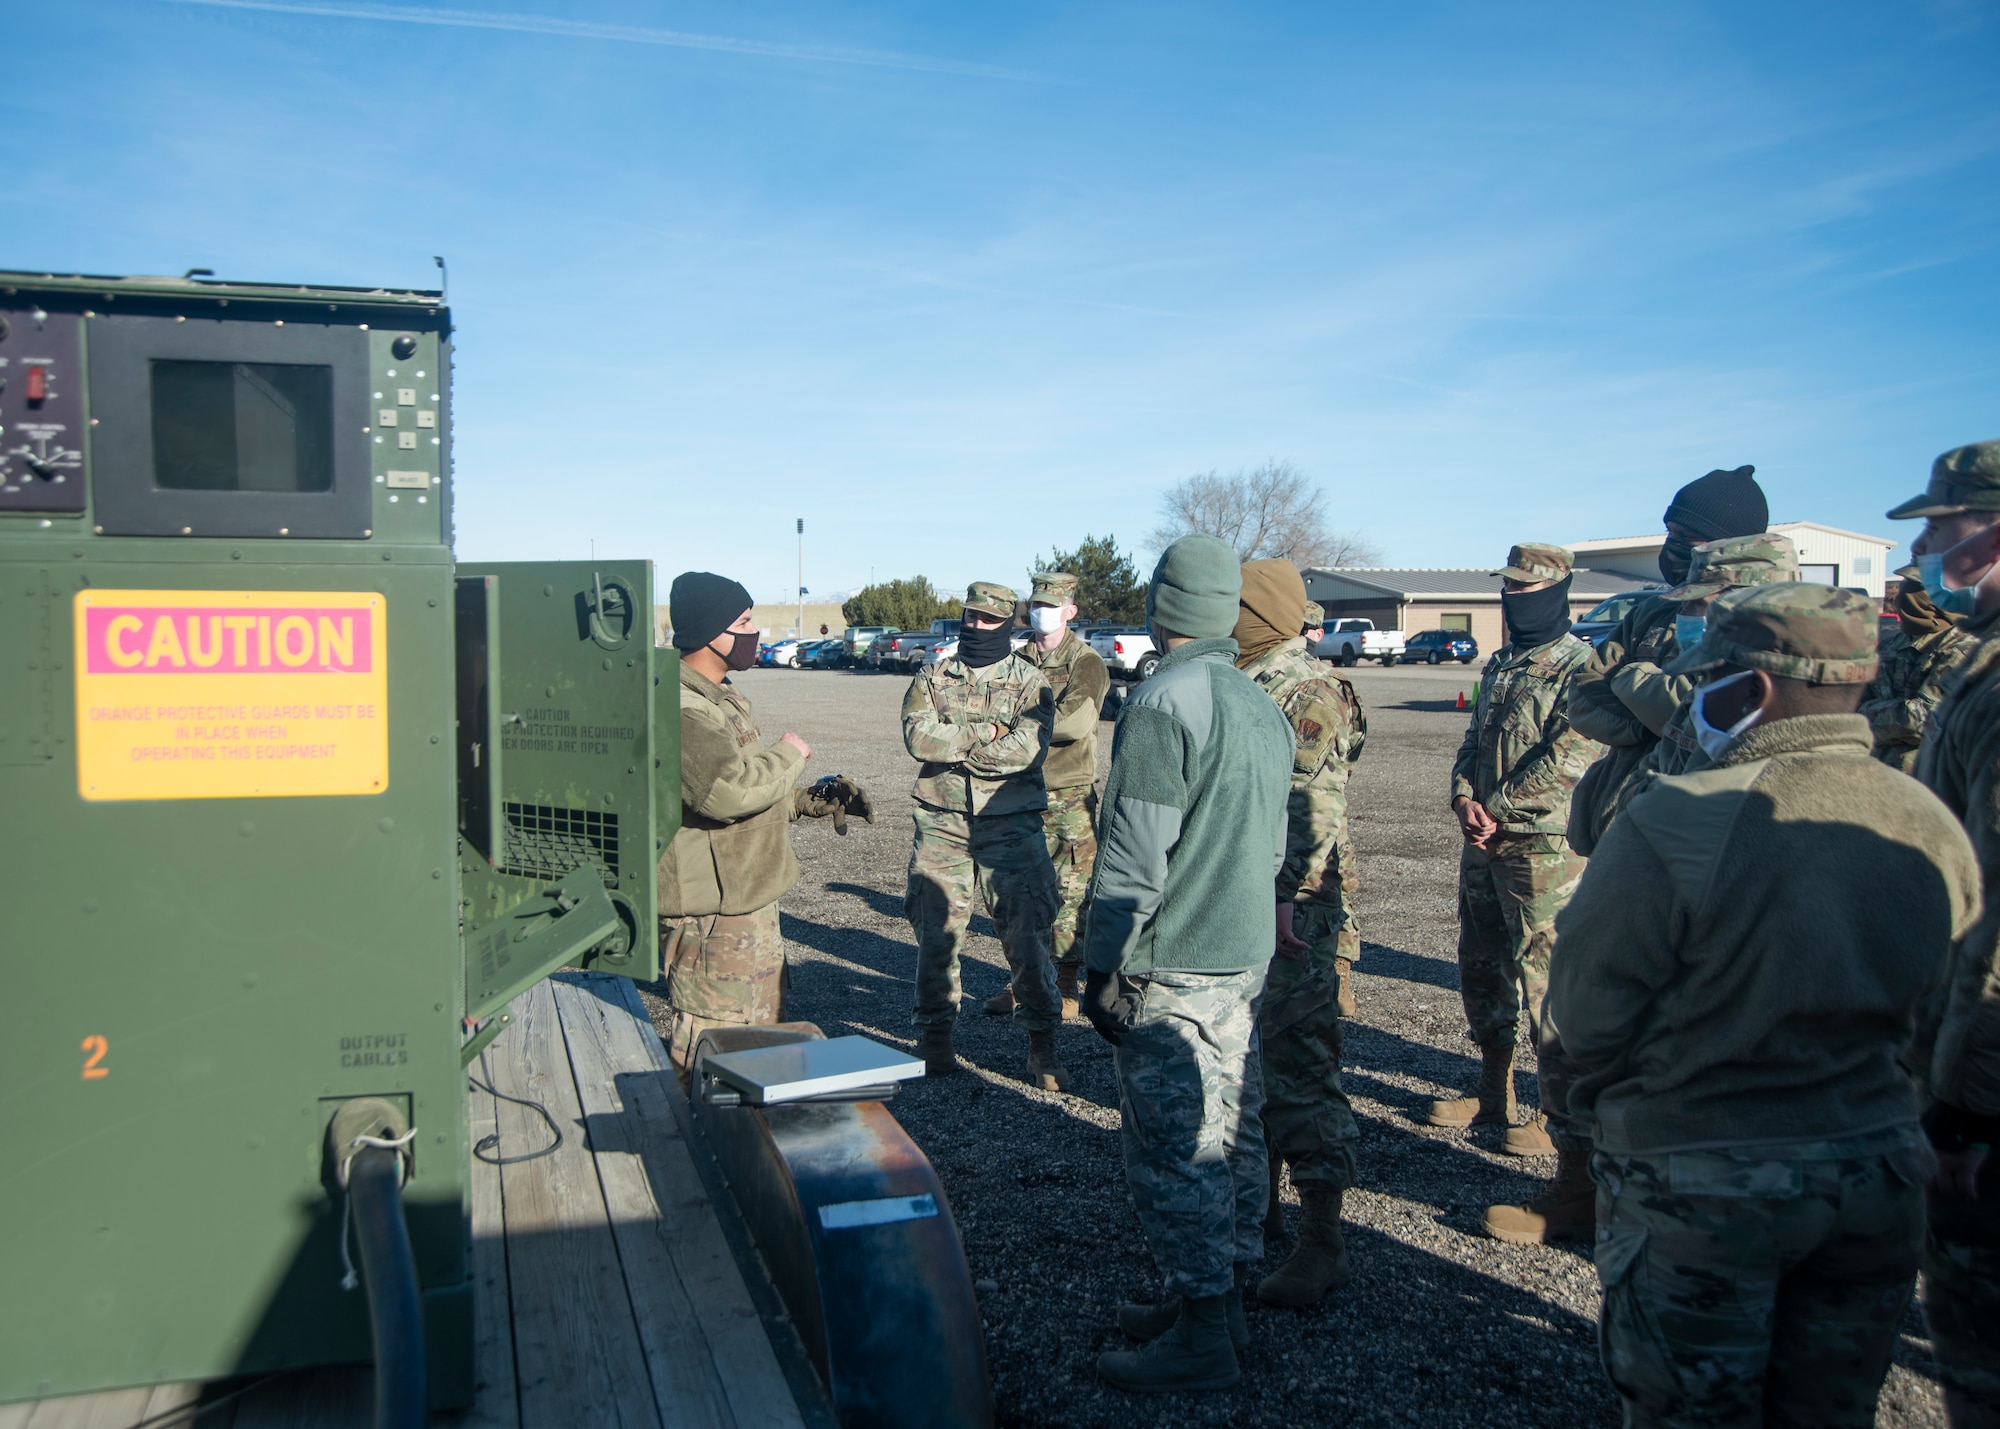 An Airman teaches a group of Airmen about the components of the generator.